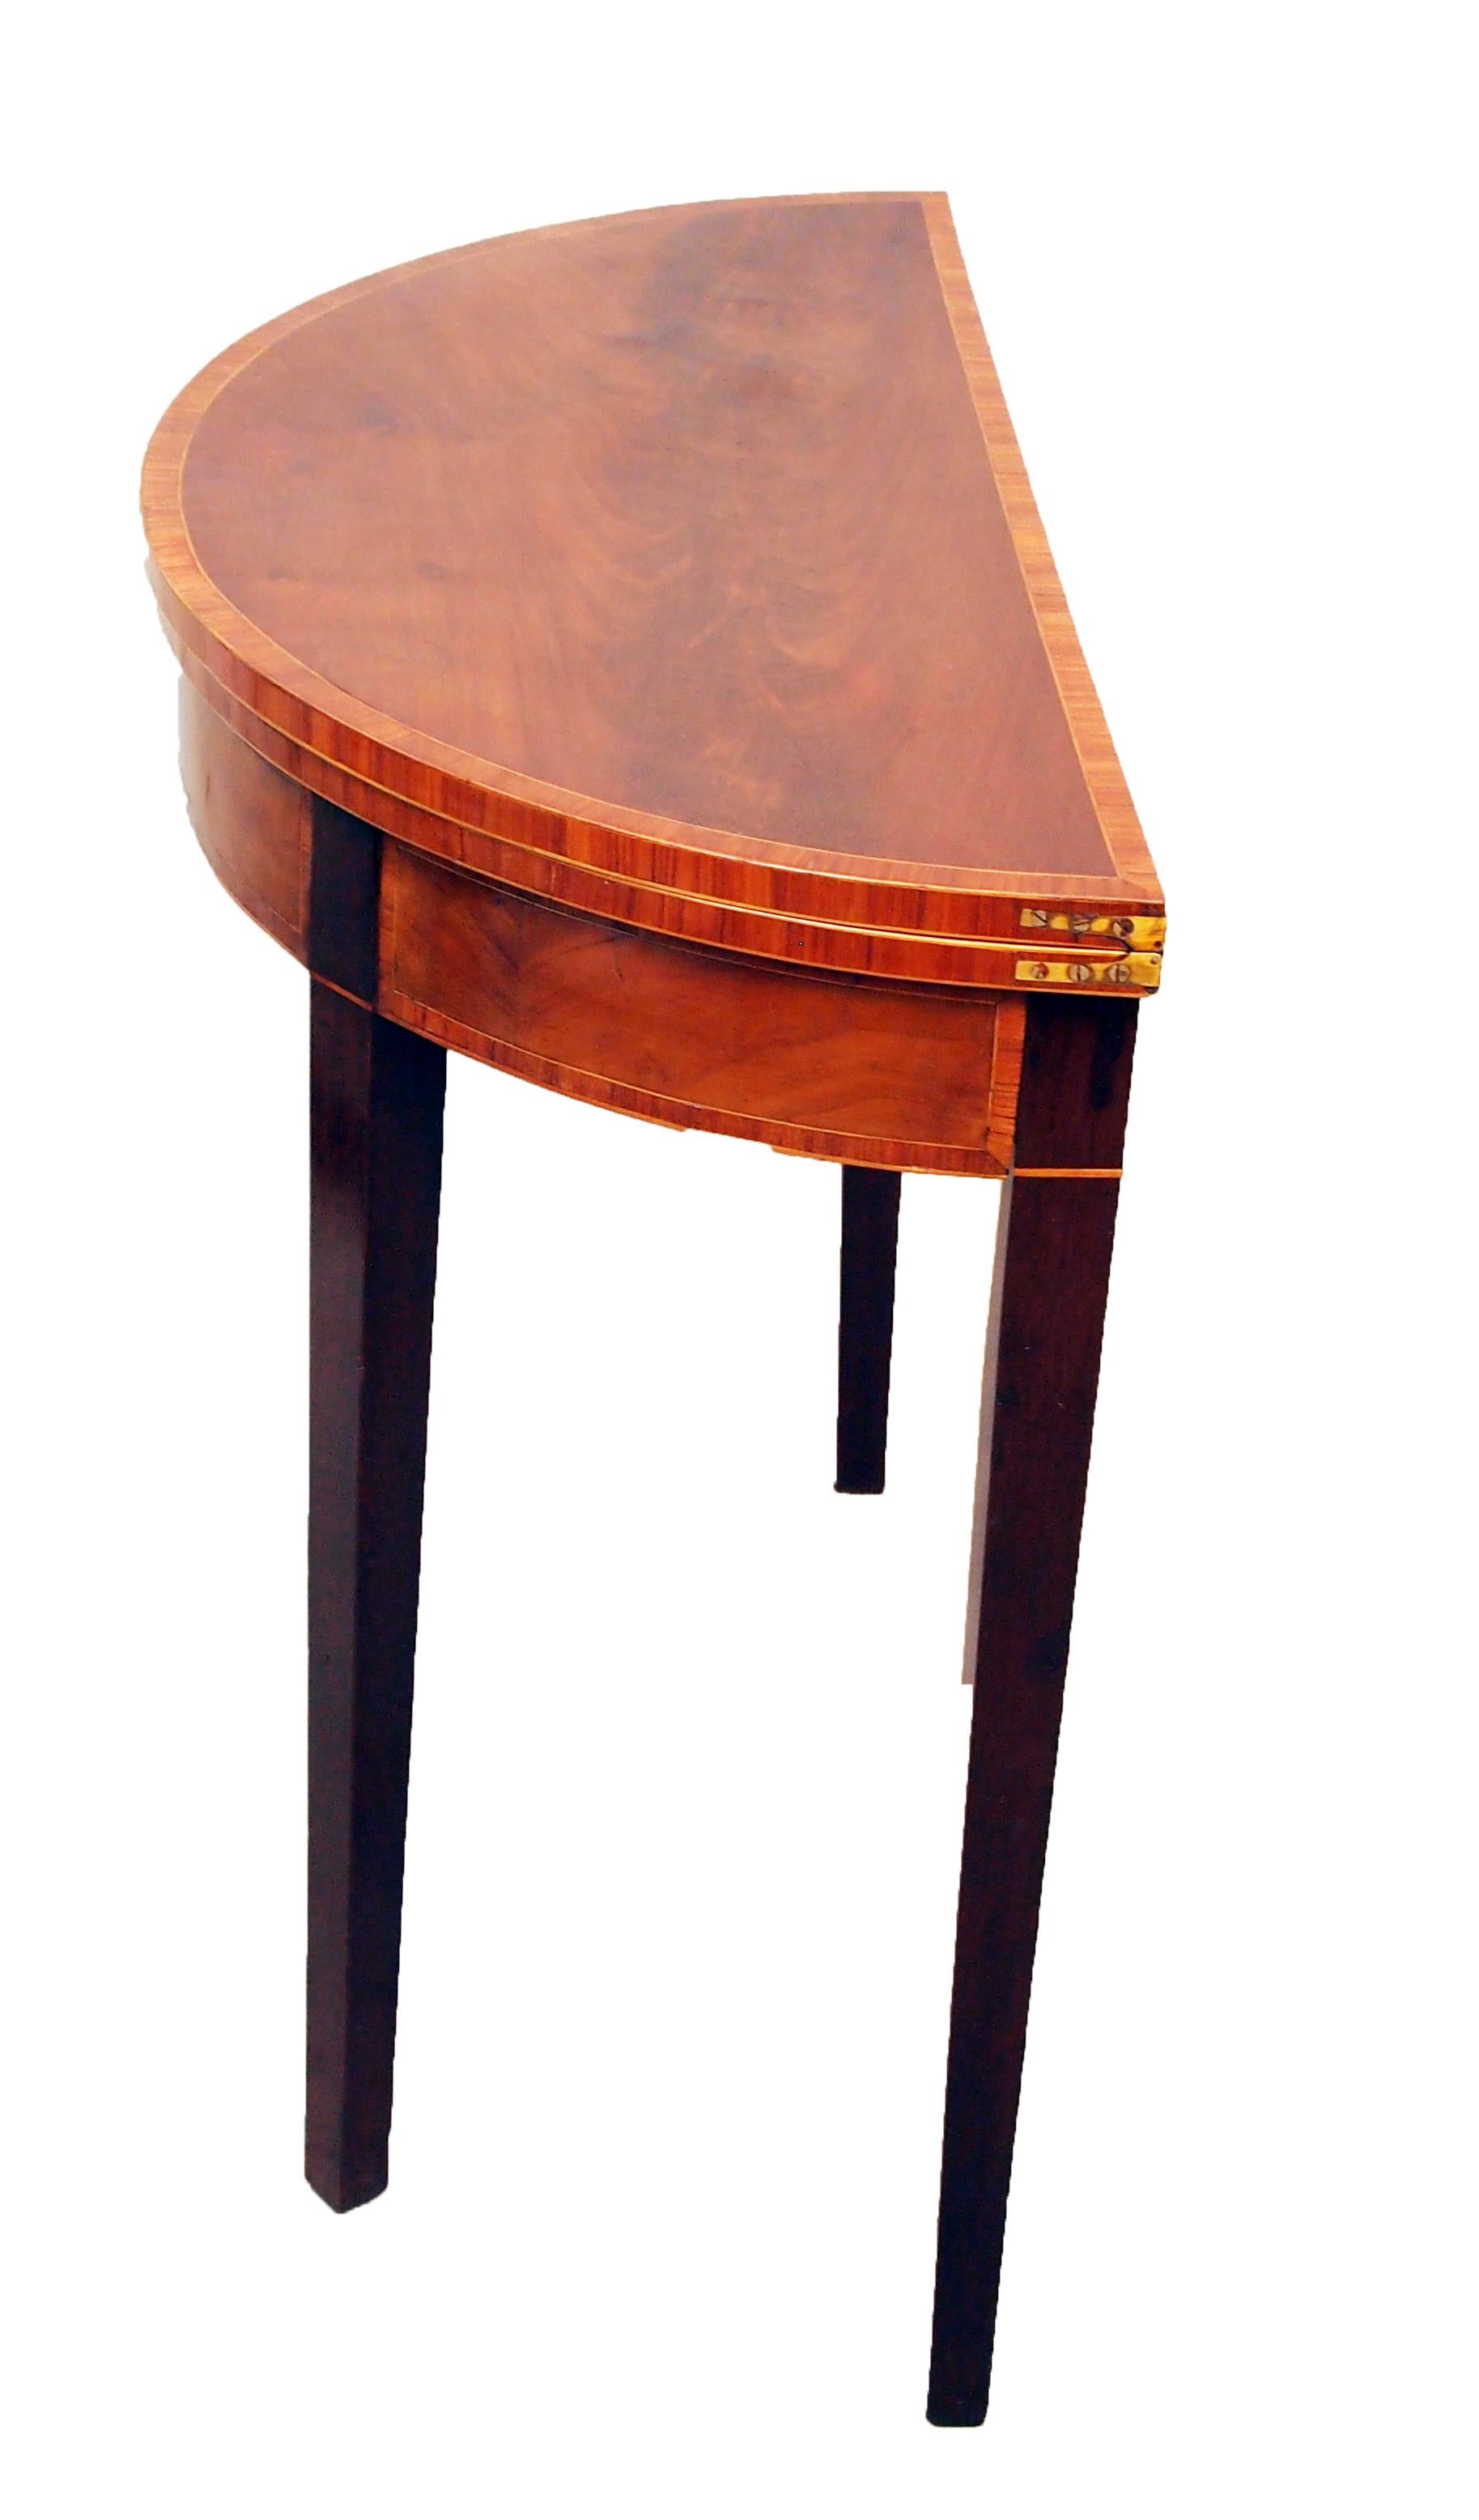 A very good quality George III period mahogany demilune
card table of diminutive proportion having superbly figured
and crossbanded folding top raised on elegant square tapered
legs.